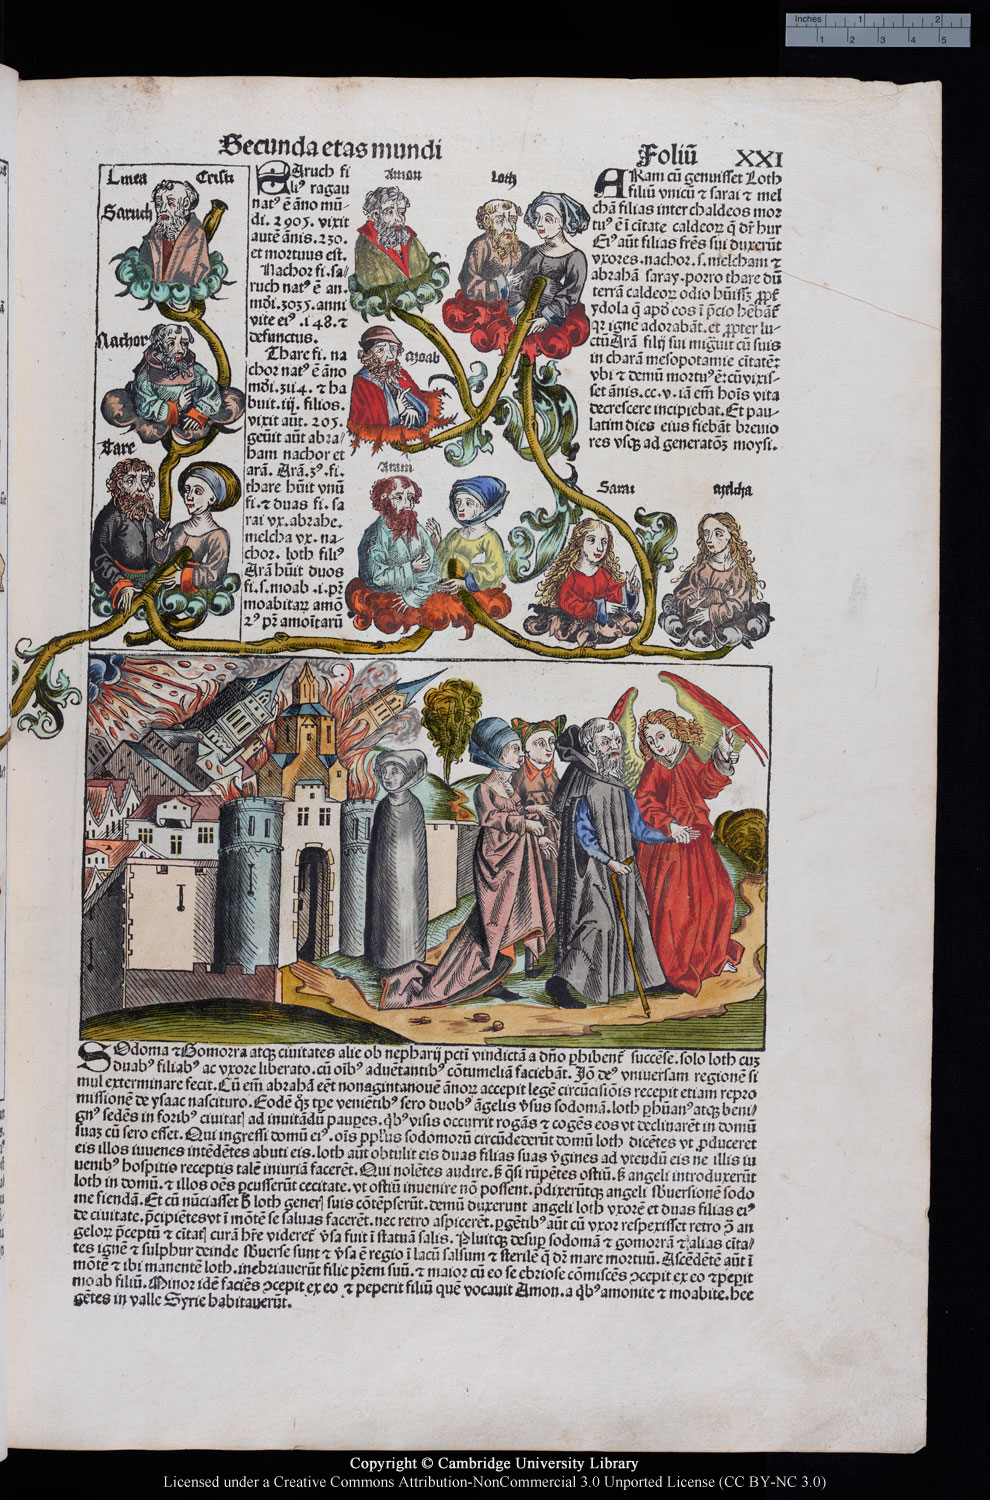 Scan of a page from the Nuremberg Chronicle, printed in 1493